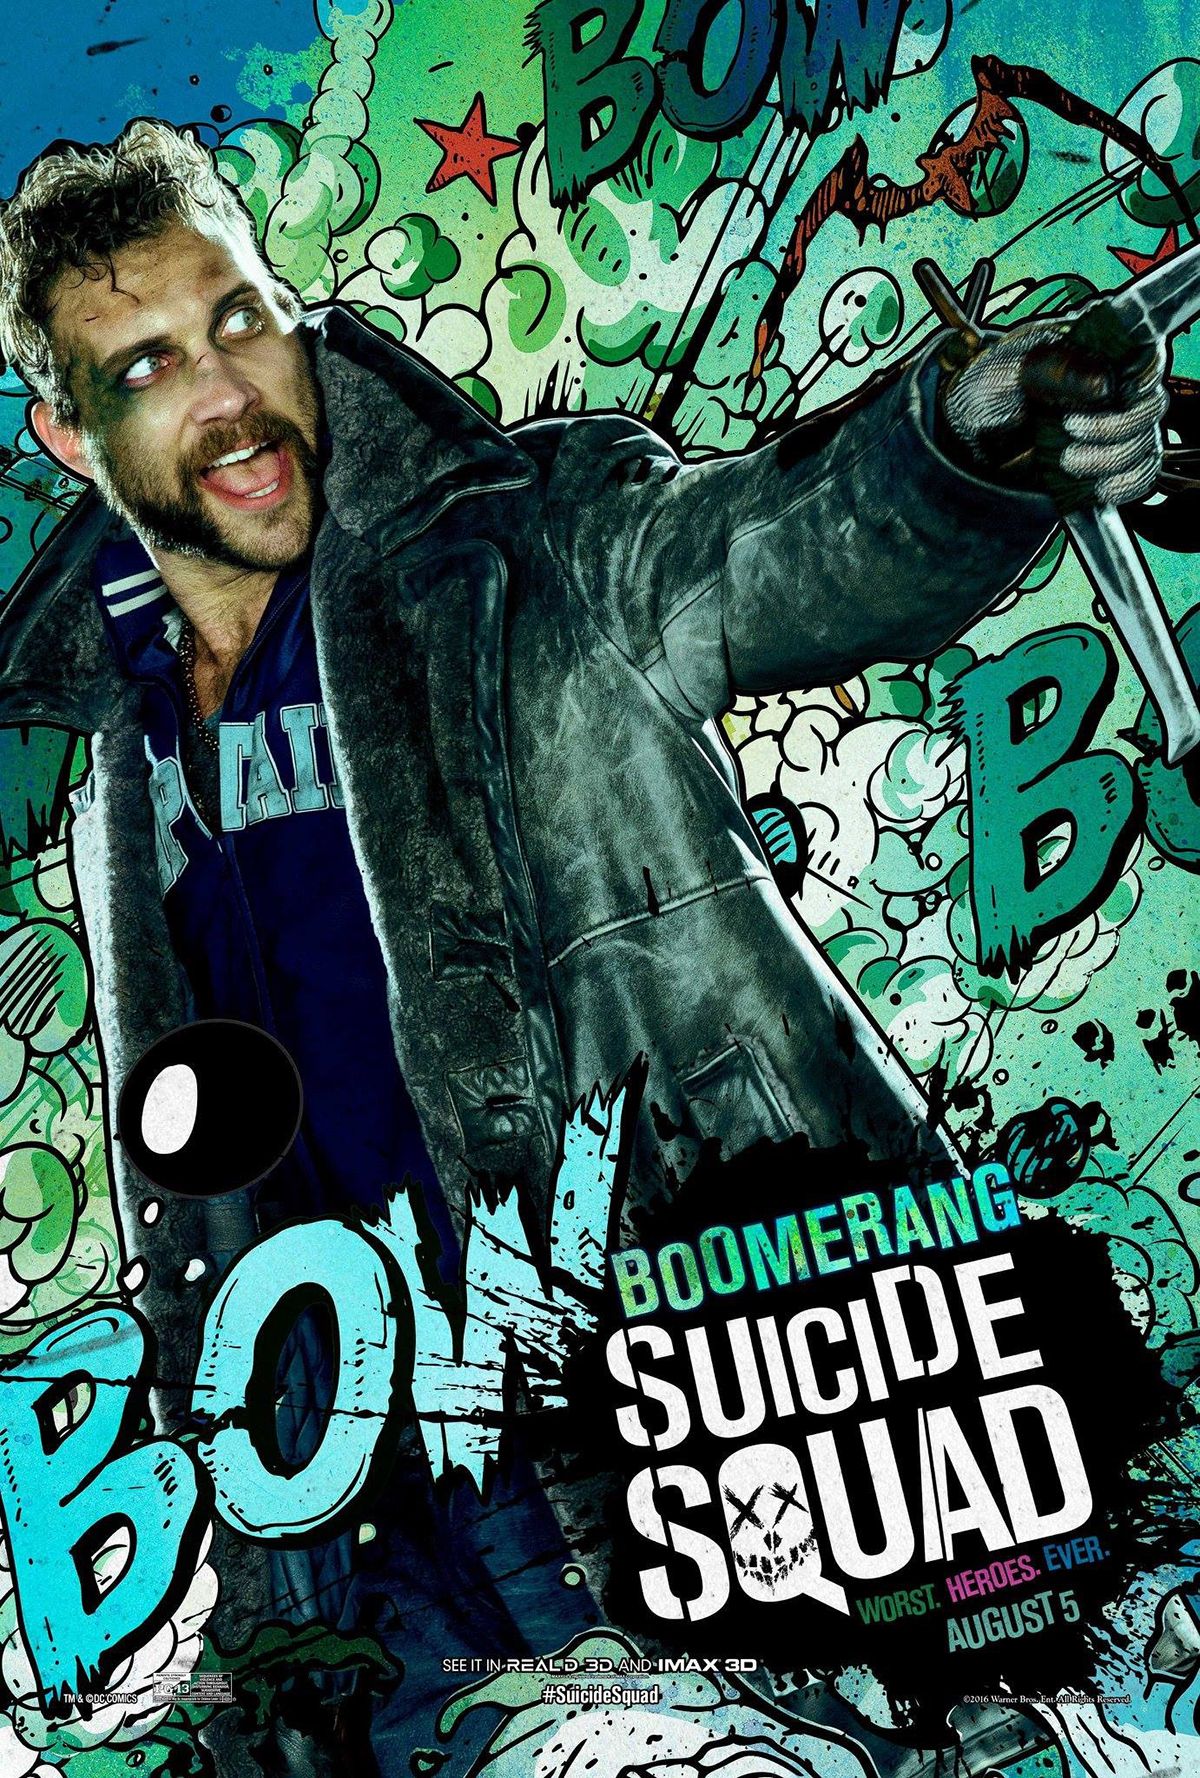 Suicide Squad (2016) Posters (7 of 49)